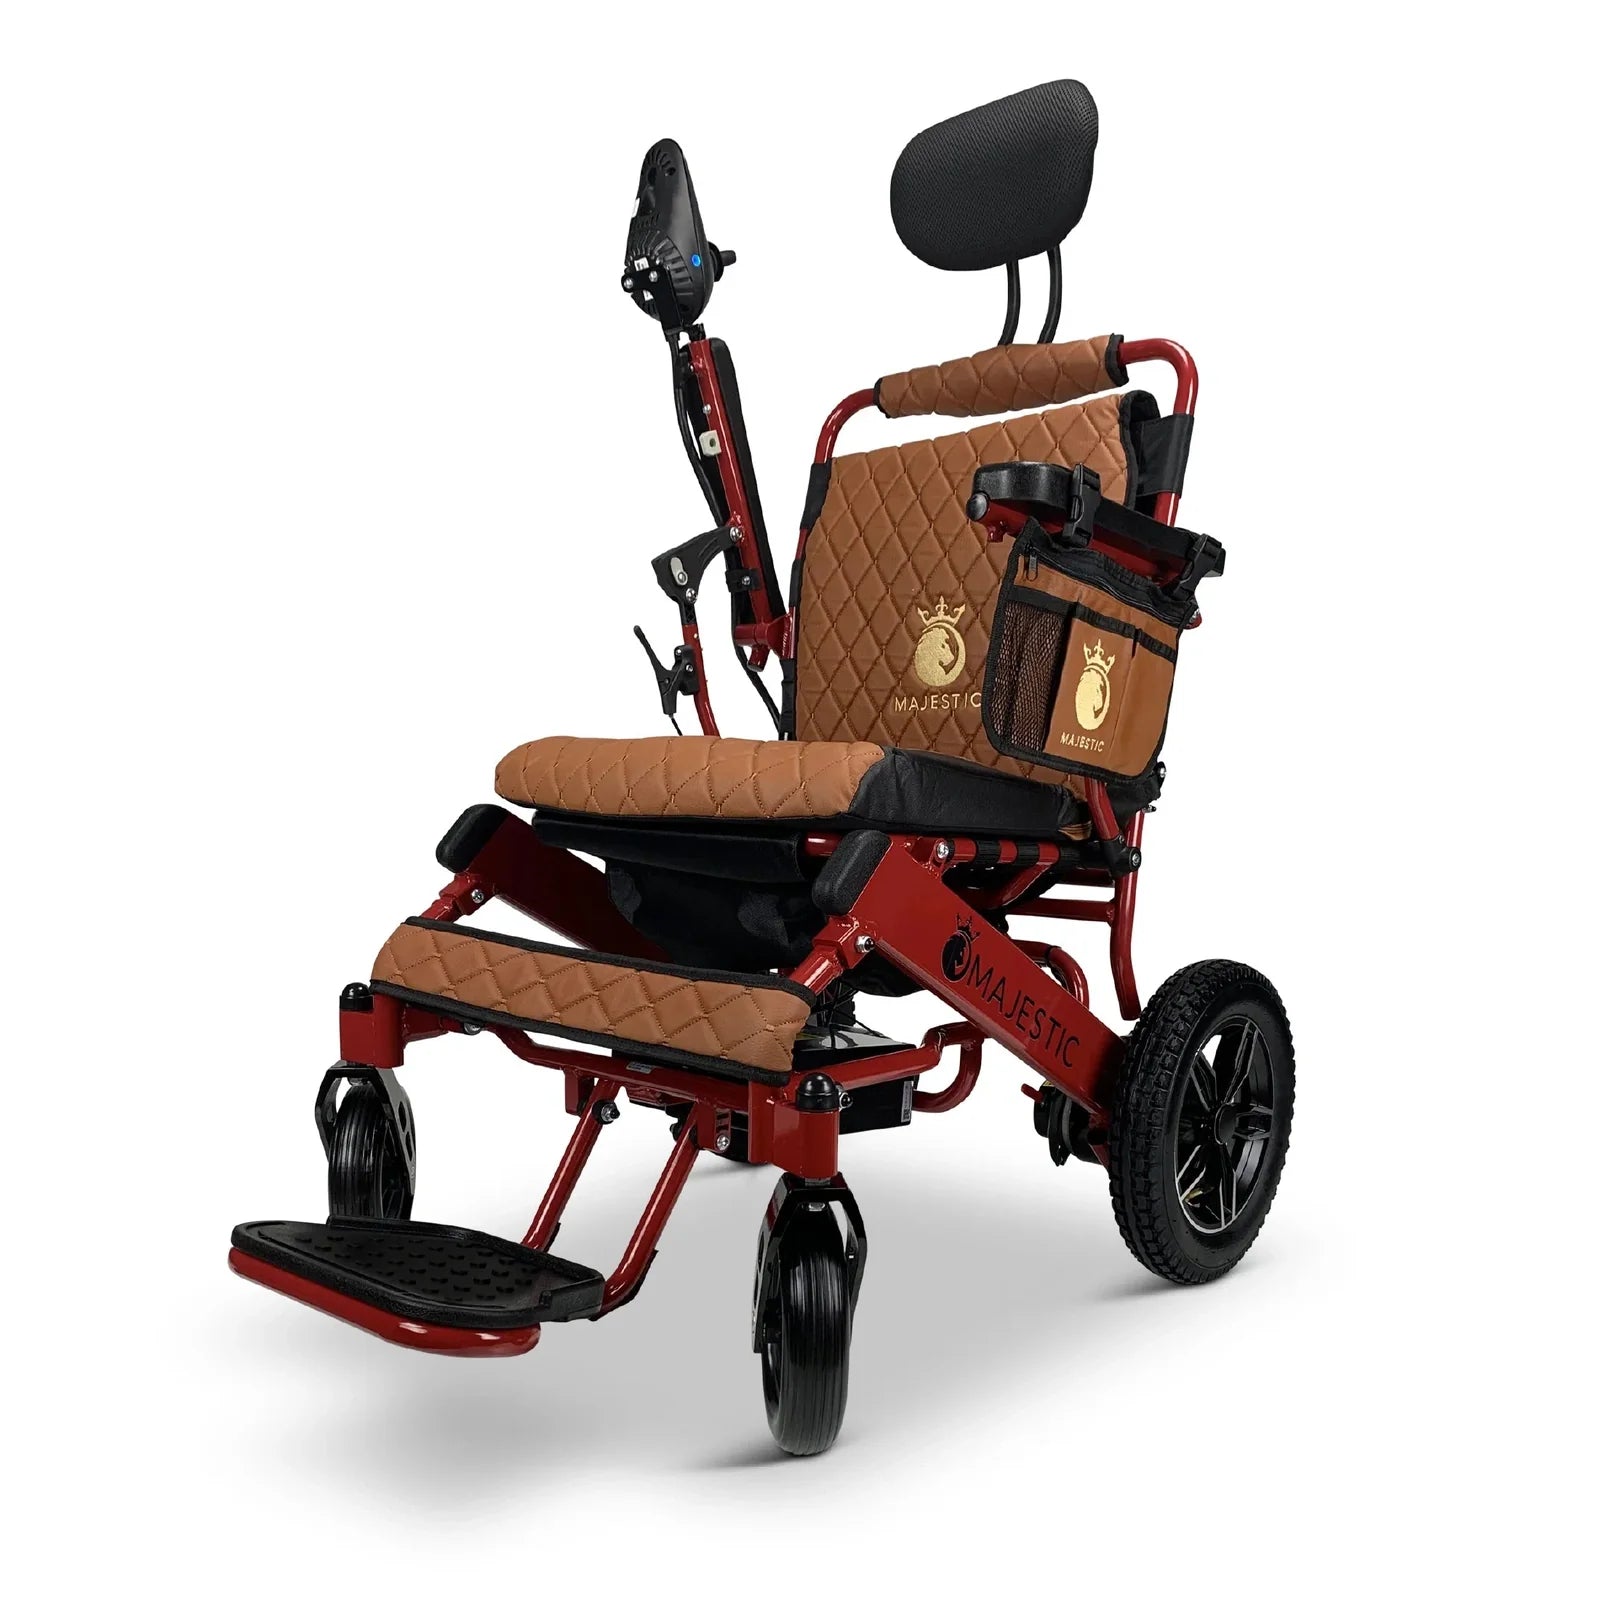 ComfyGO Majestic IQ-8000 Remote Controlled Lightweight Folding Electric Wheelchair Power Wheelchairs ComfyGO Red Taba 10 Miles & 17.5" Seat Width